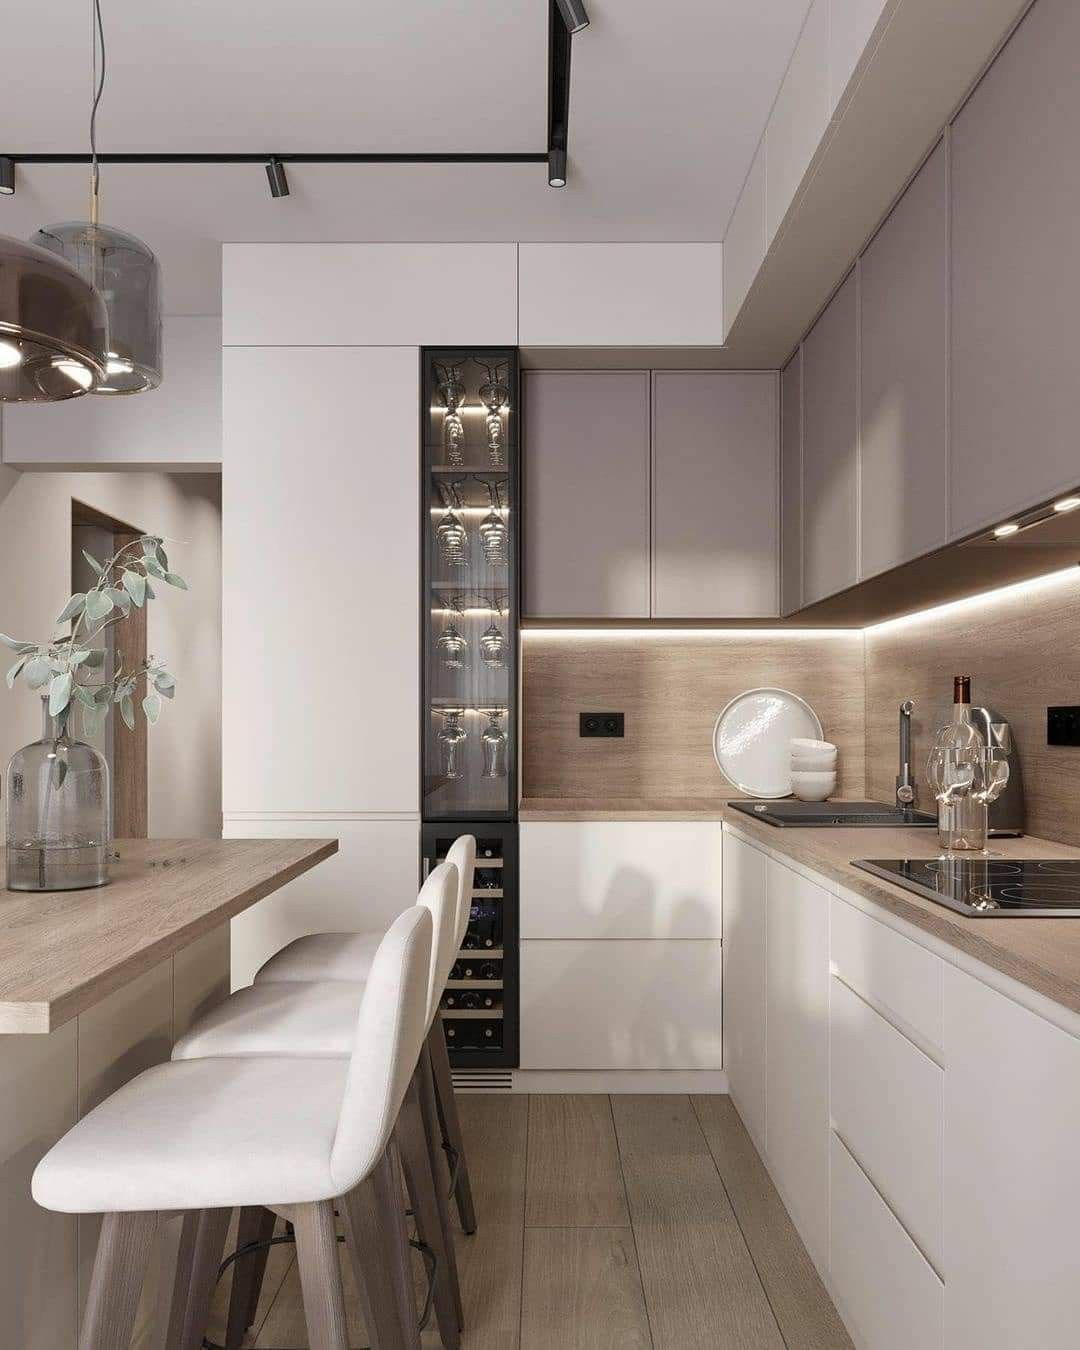 Kitchen Lighting: Everything You Need To Know